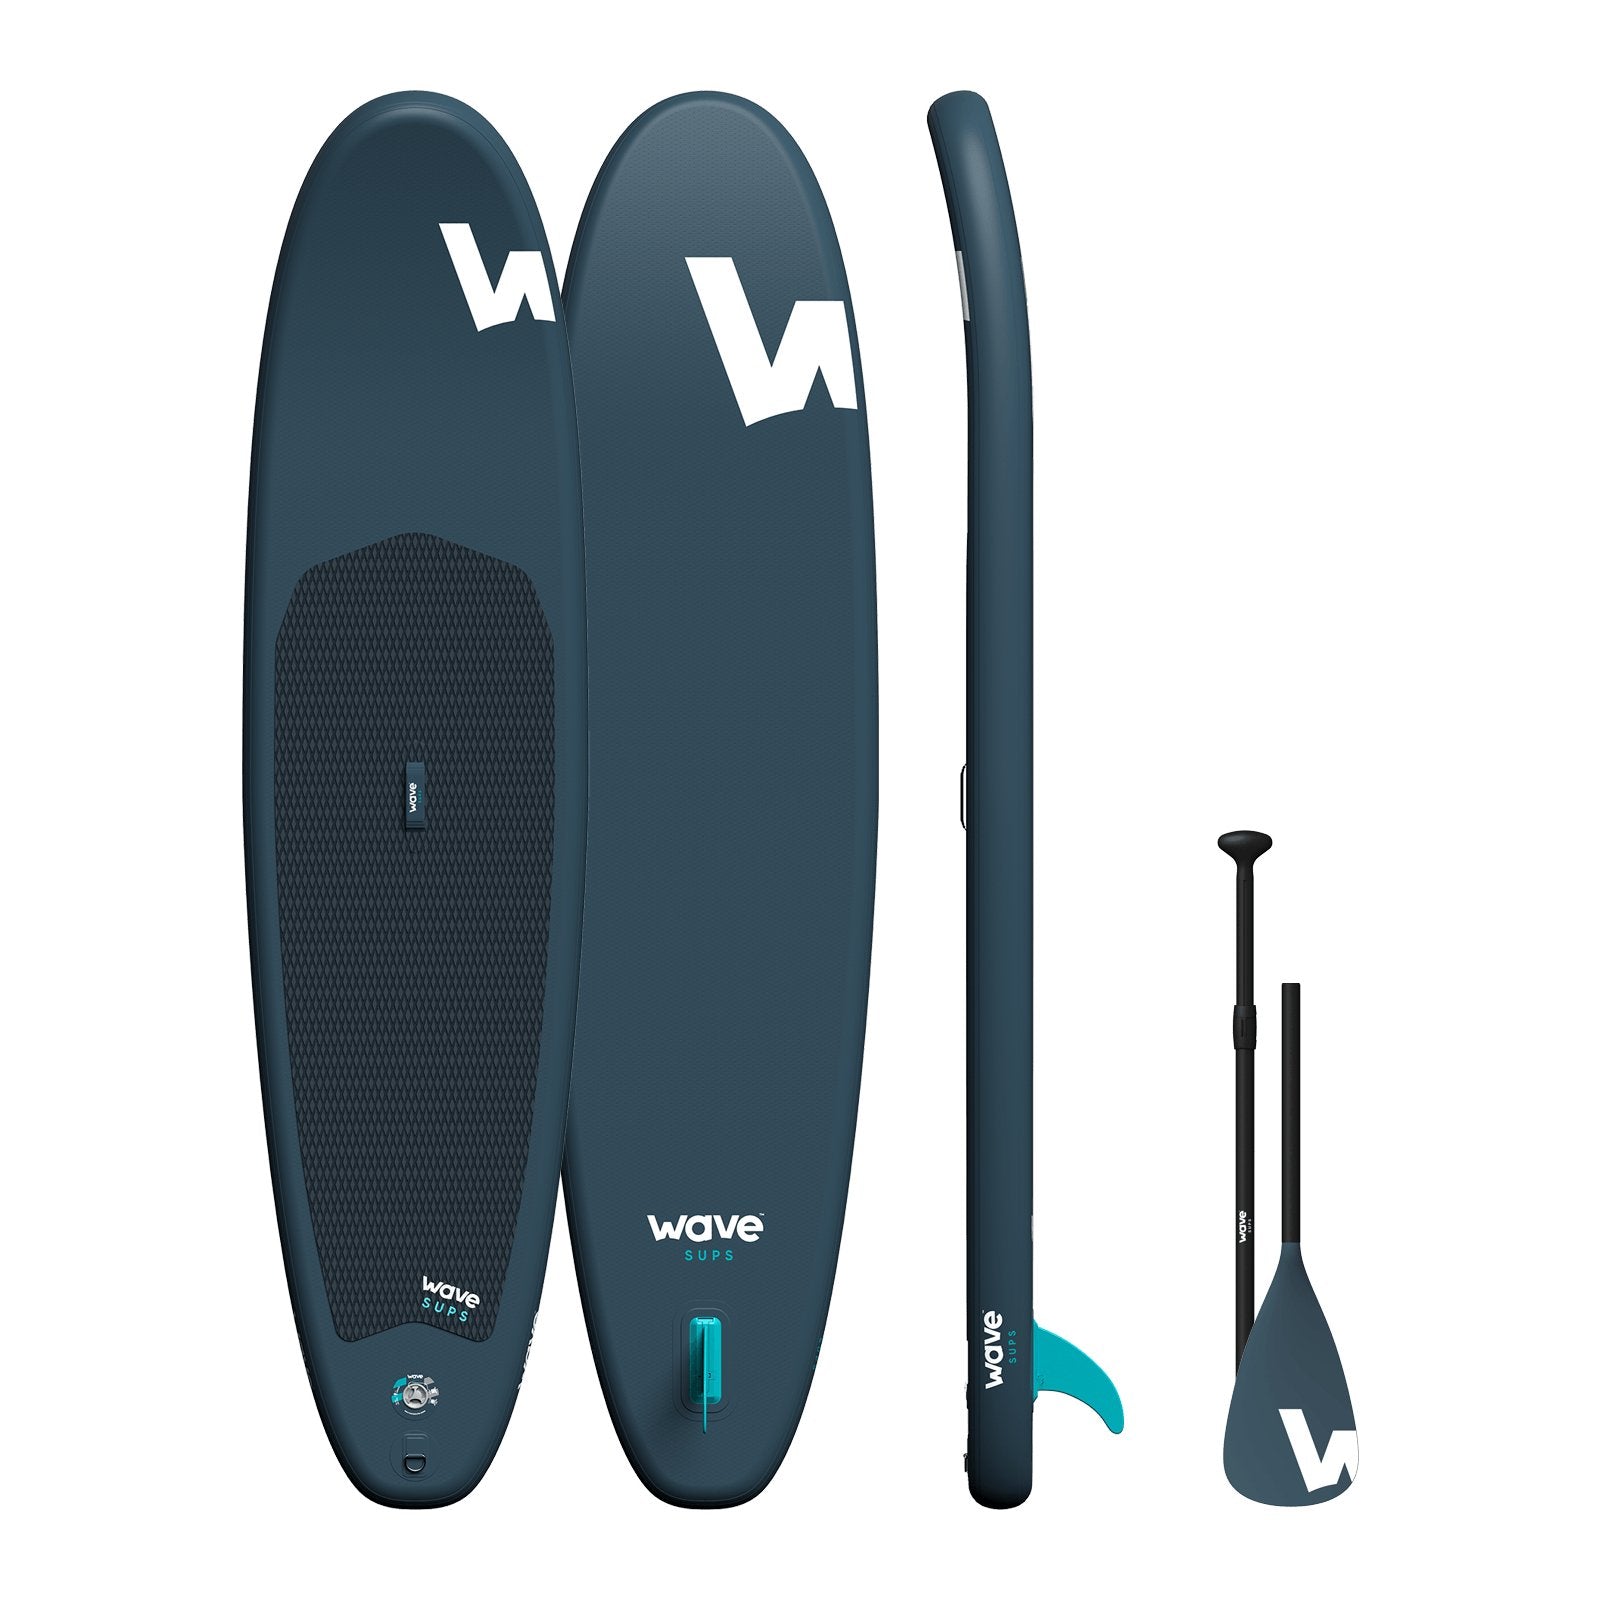 Cruiser SUP | Inflatable Stand-Up Paddleboard | 10/11 ft | Navy - Wave Sups EU